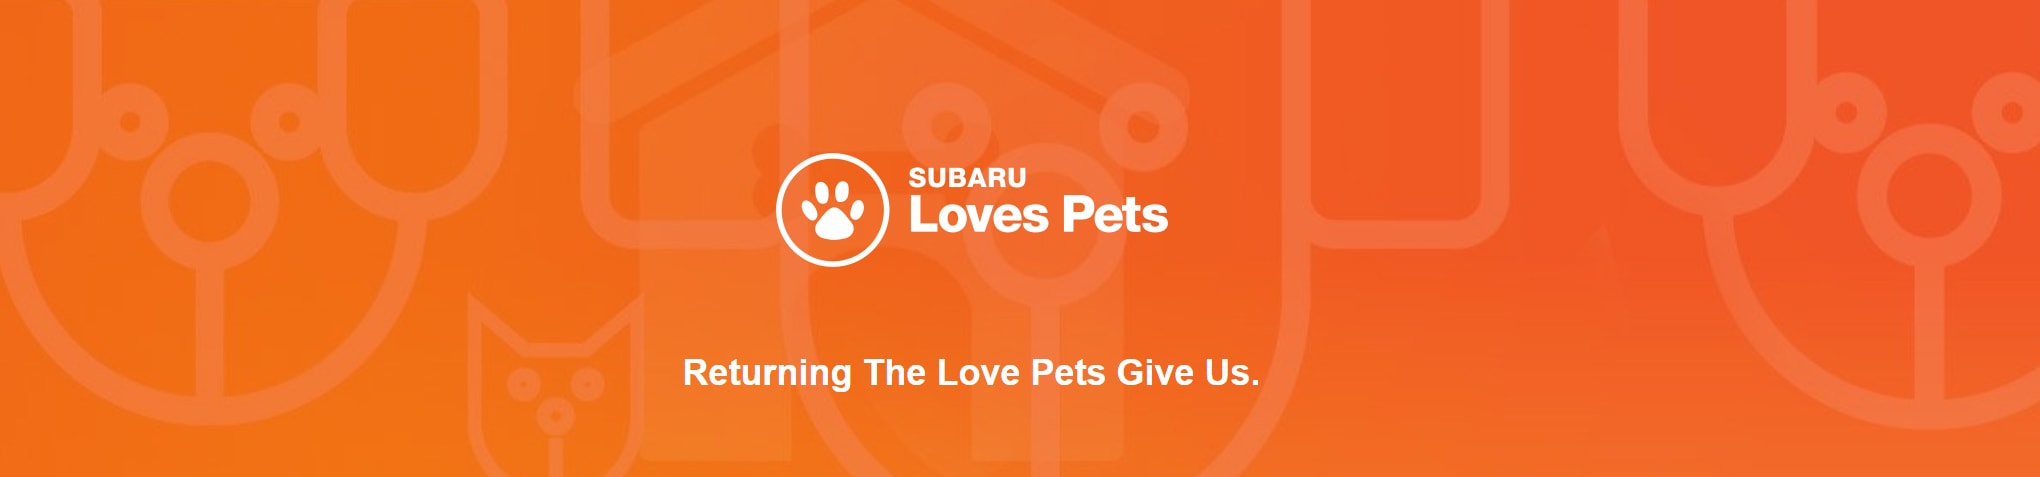 An orange banner reads: Subaru Loves Pets. Returning The Love Pets Give Us.